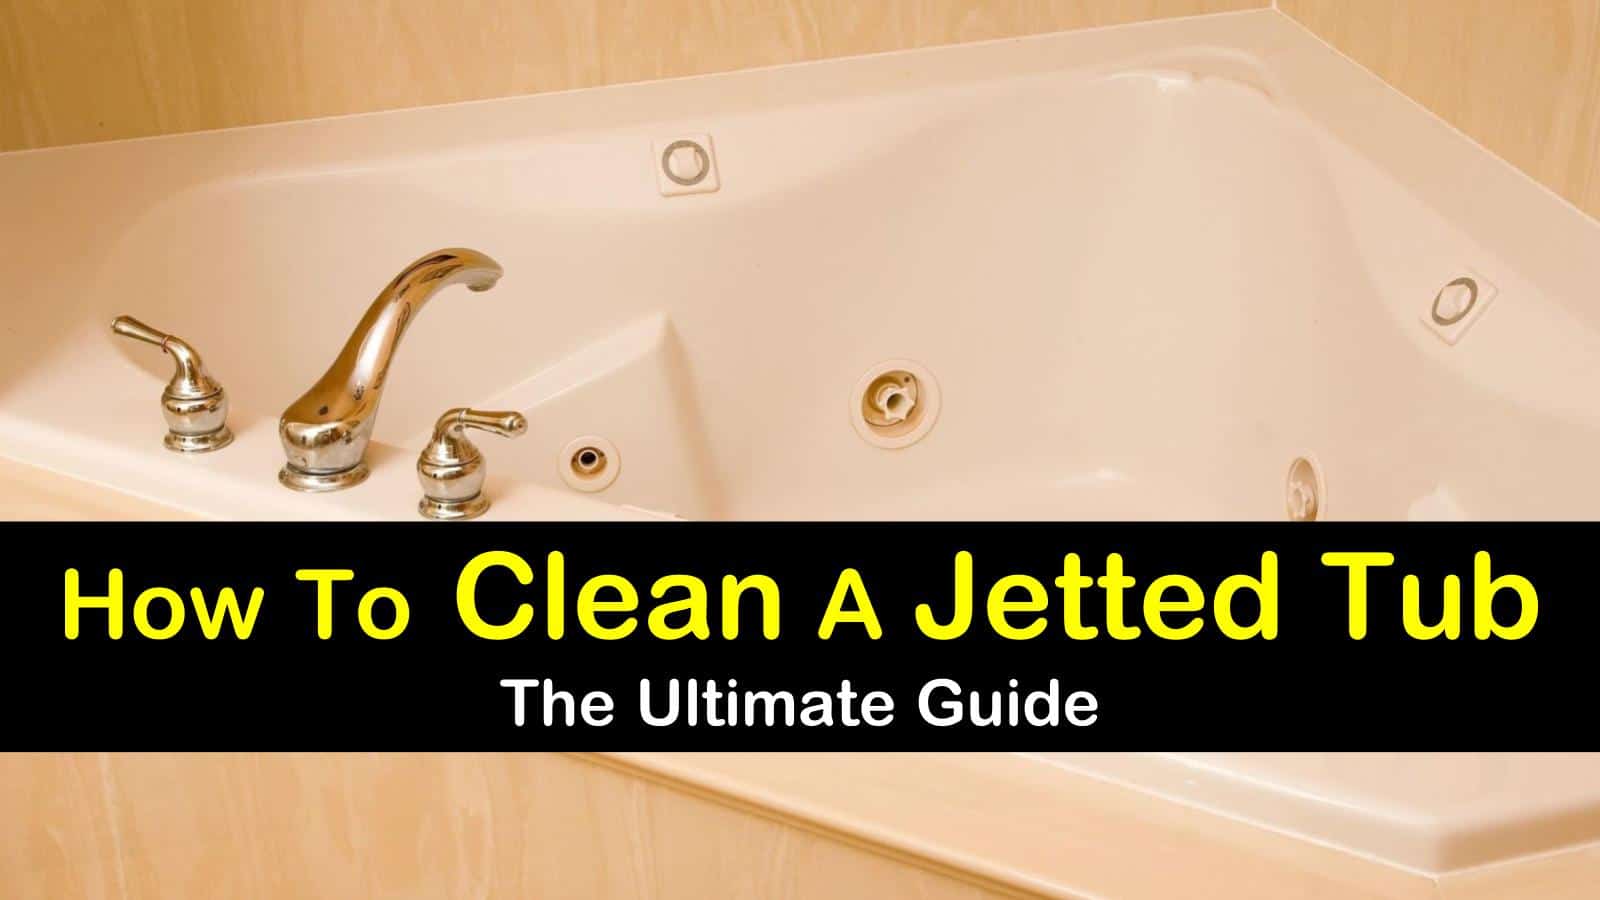 3 Smart Simple Ways To Clean A Jetted Tub, How To Clean Dirty Bathtub Jets